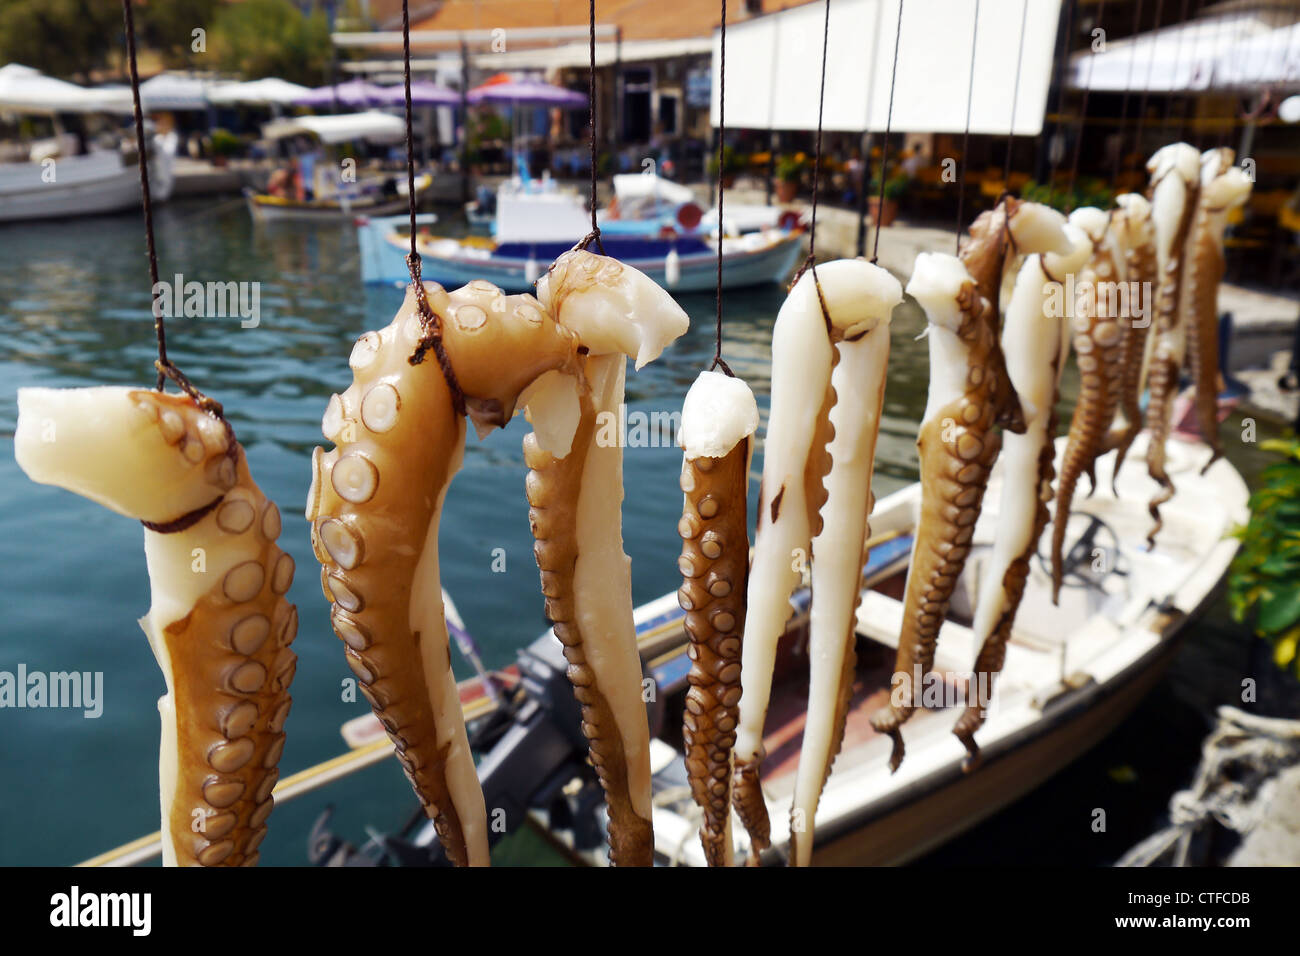 greek harbor with octopus tentacles Stock Photo